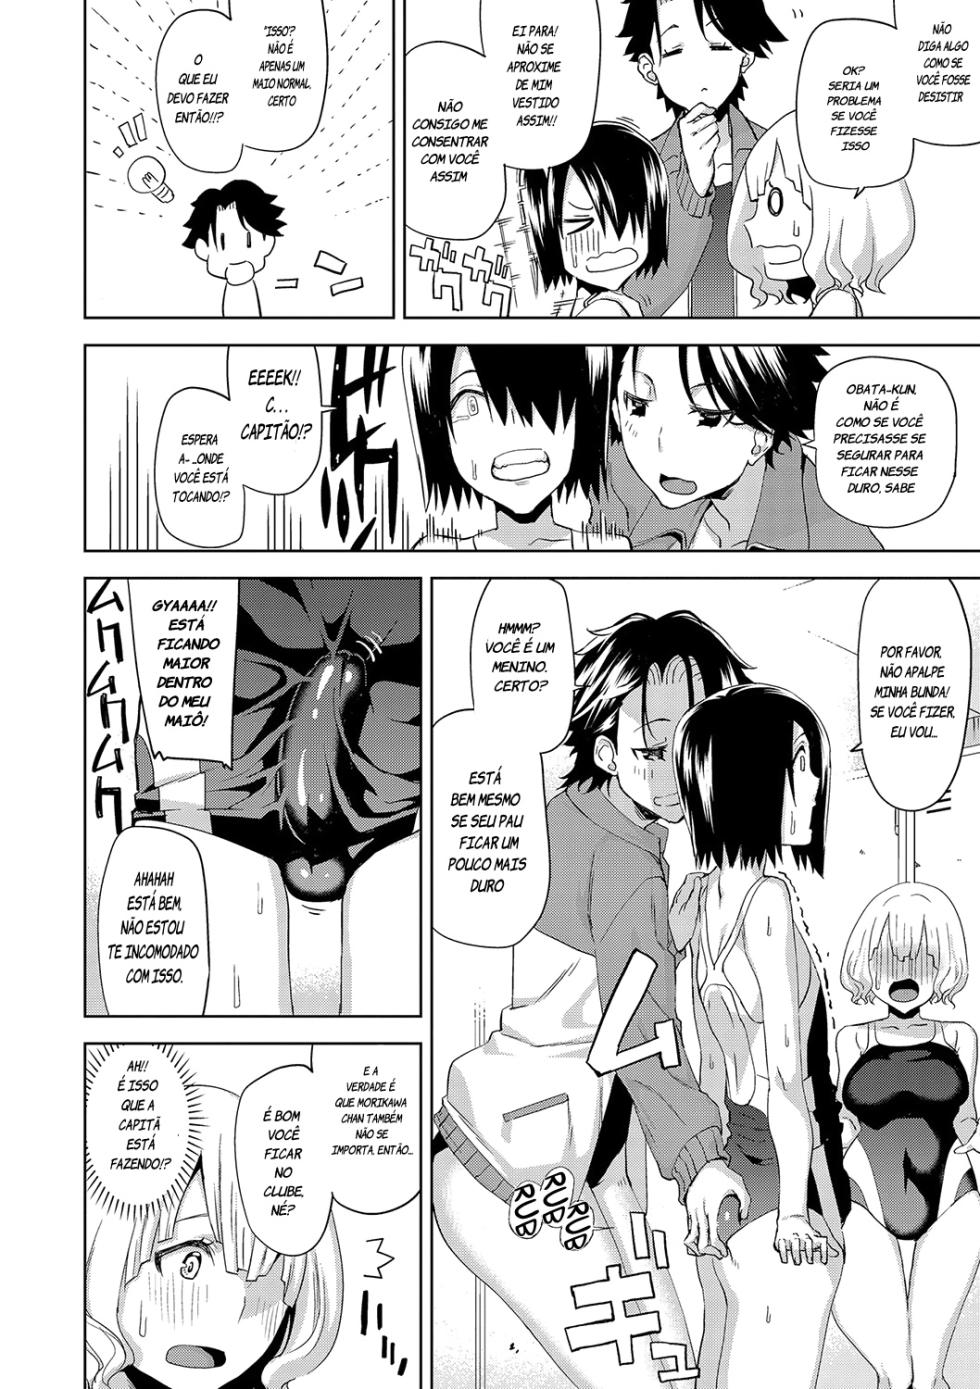 Hamedori Girls - Girls from point of view - Page 6